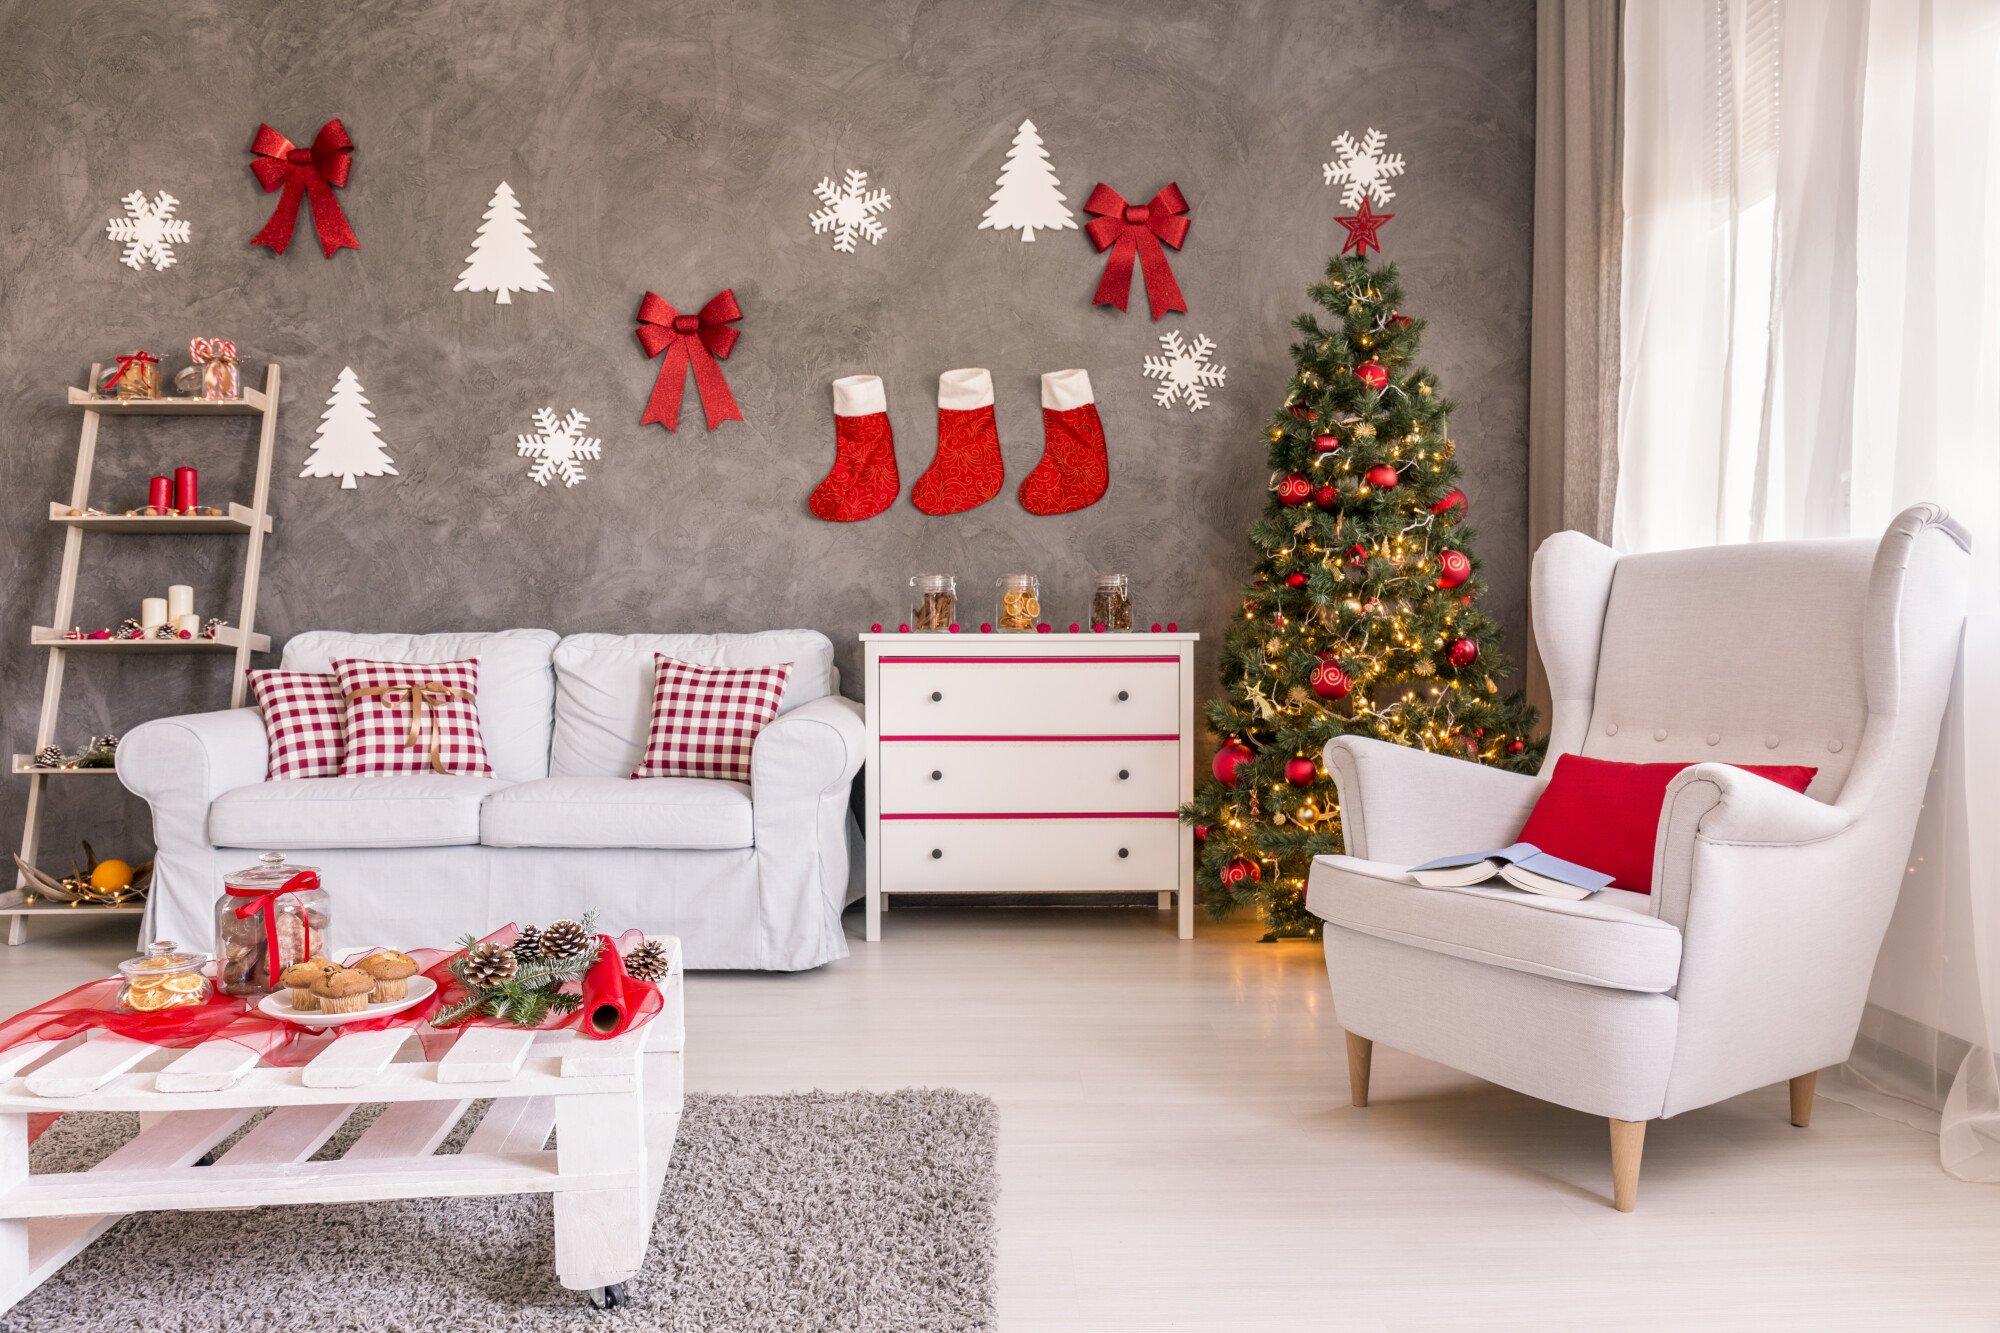 Austin, TX Holiday Vacation Rental Ideas: Creating a Festive Home Away from Home